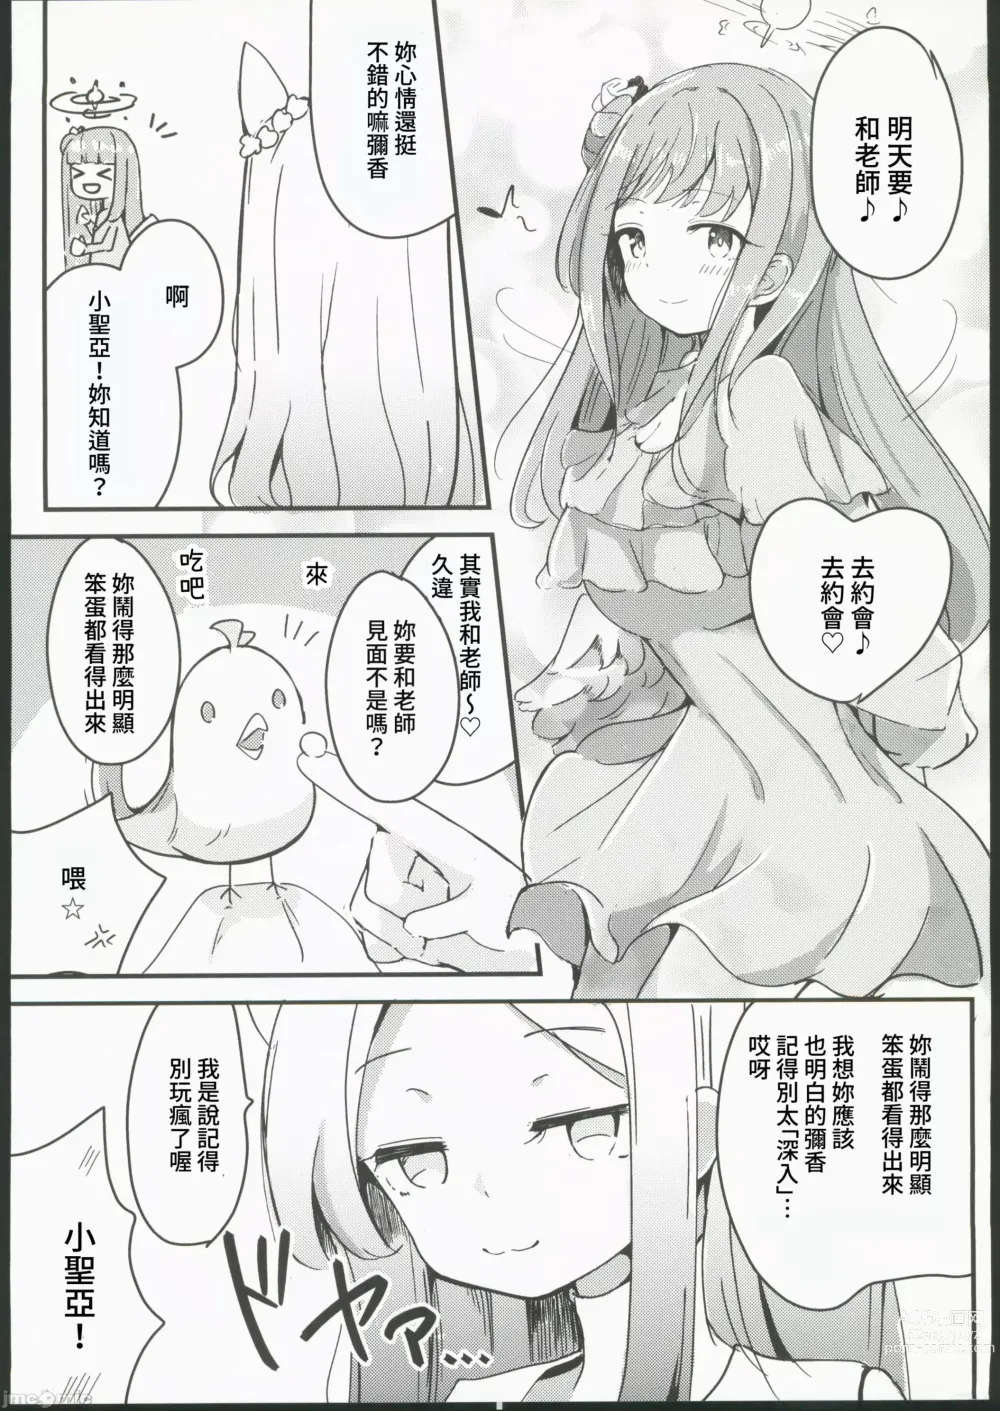 Page 33 of doujinshi Blanc Aile to Otogibanashi - The treaty lost, but hope remains.